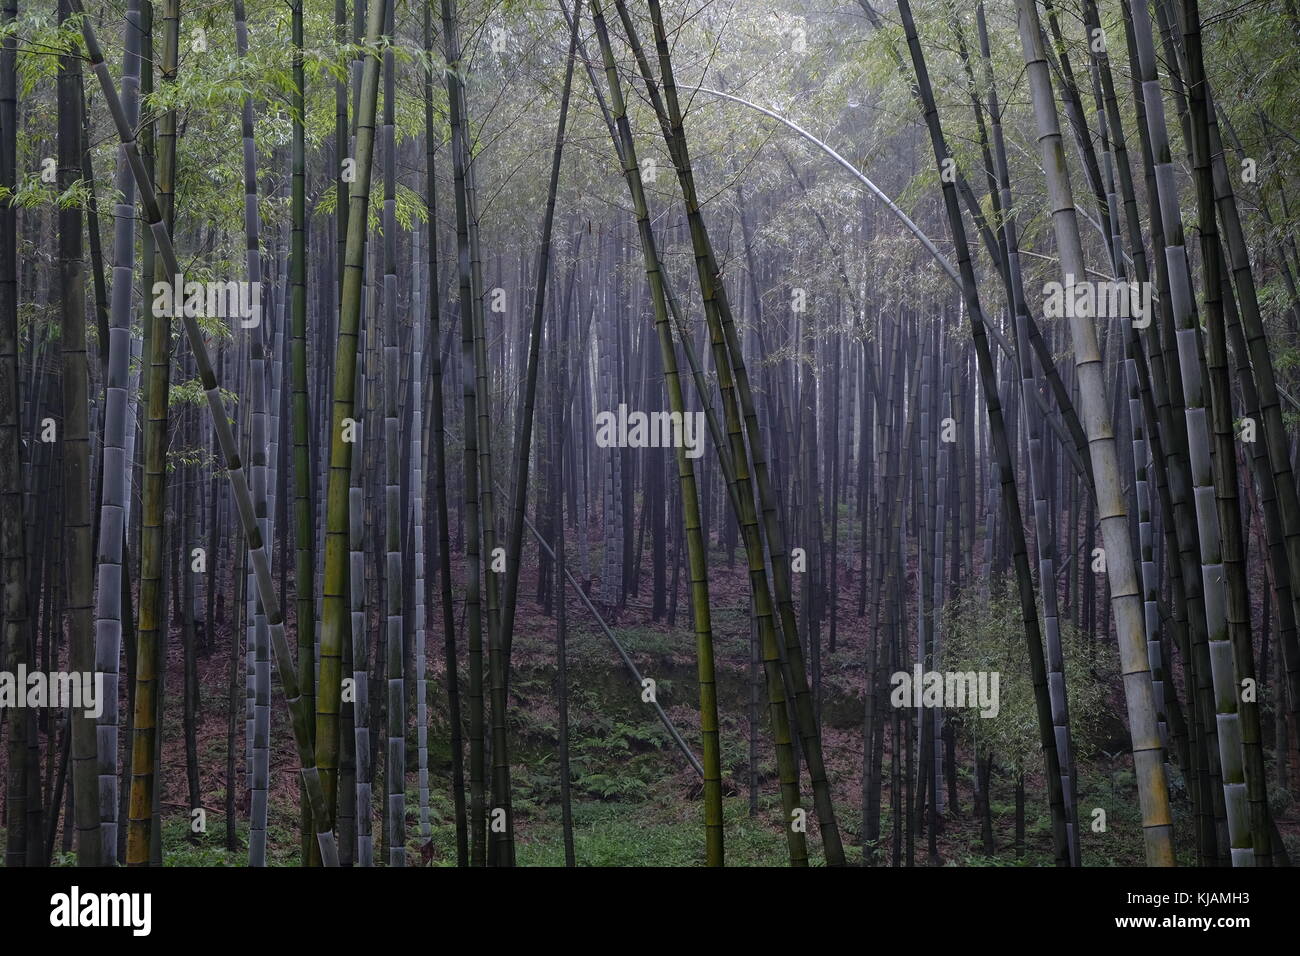 Different coloured bamboos at the Shunan Bamboo Forest in Sichuan province at China Stock Photo